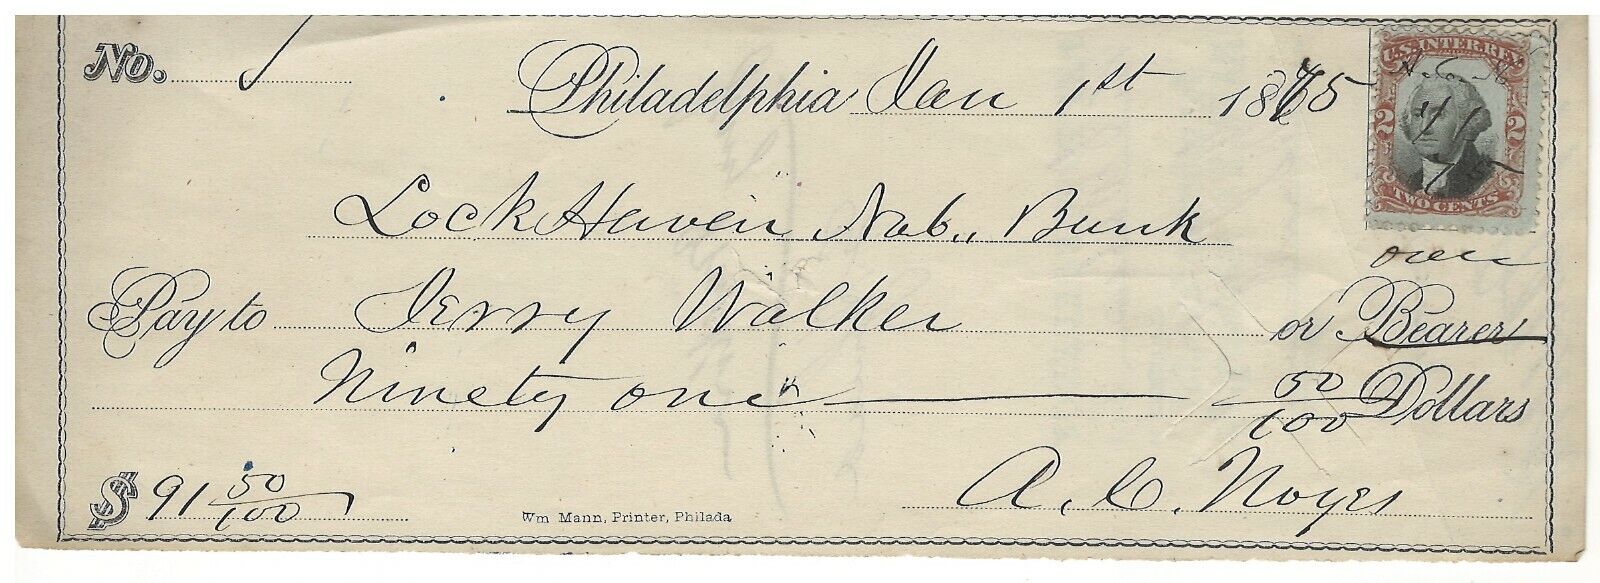 1875 Check Lock Haven National Bank paid to Henry Walker w/2 Cent Revenue Stamp